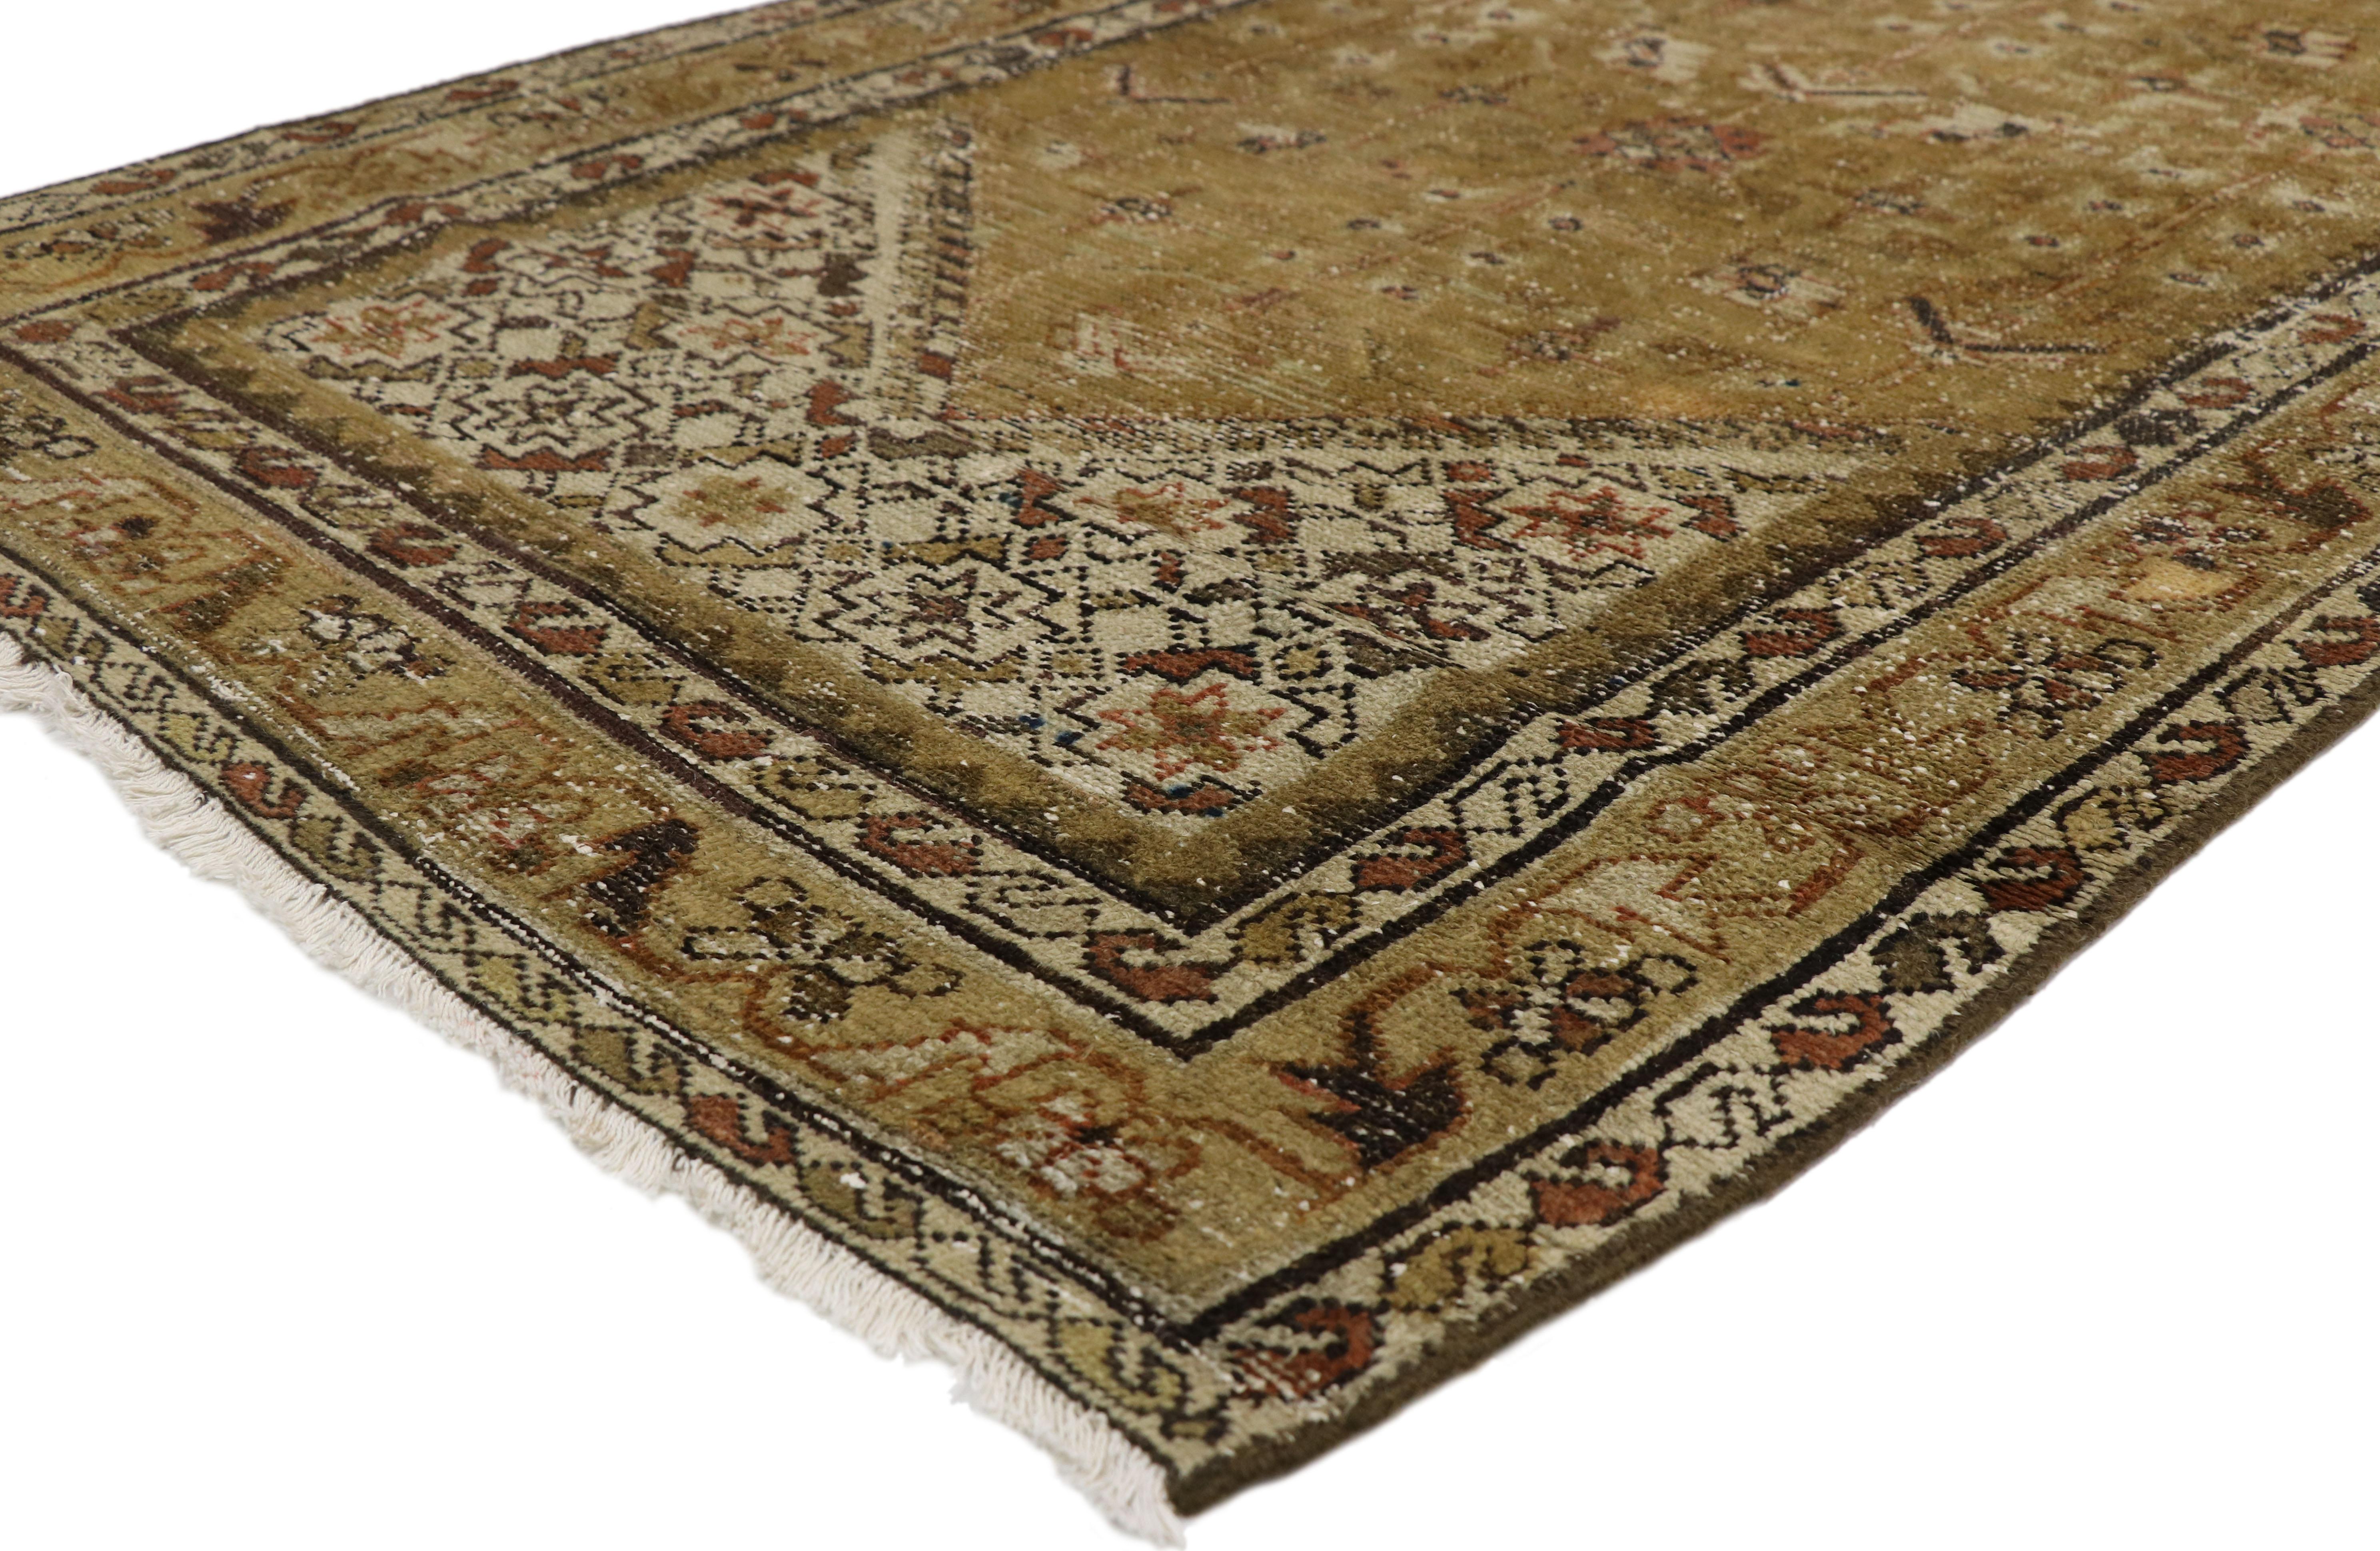 76552 Antique Persian Malayer Runner with Guli Hinnai Flower, Persian Hallway Runner 03'04 x 16'01. Balance traditional and sophistication with a mix of classic geometric motifs, neutrals and warmth. This antique Persian Malayer runner blends